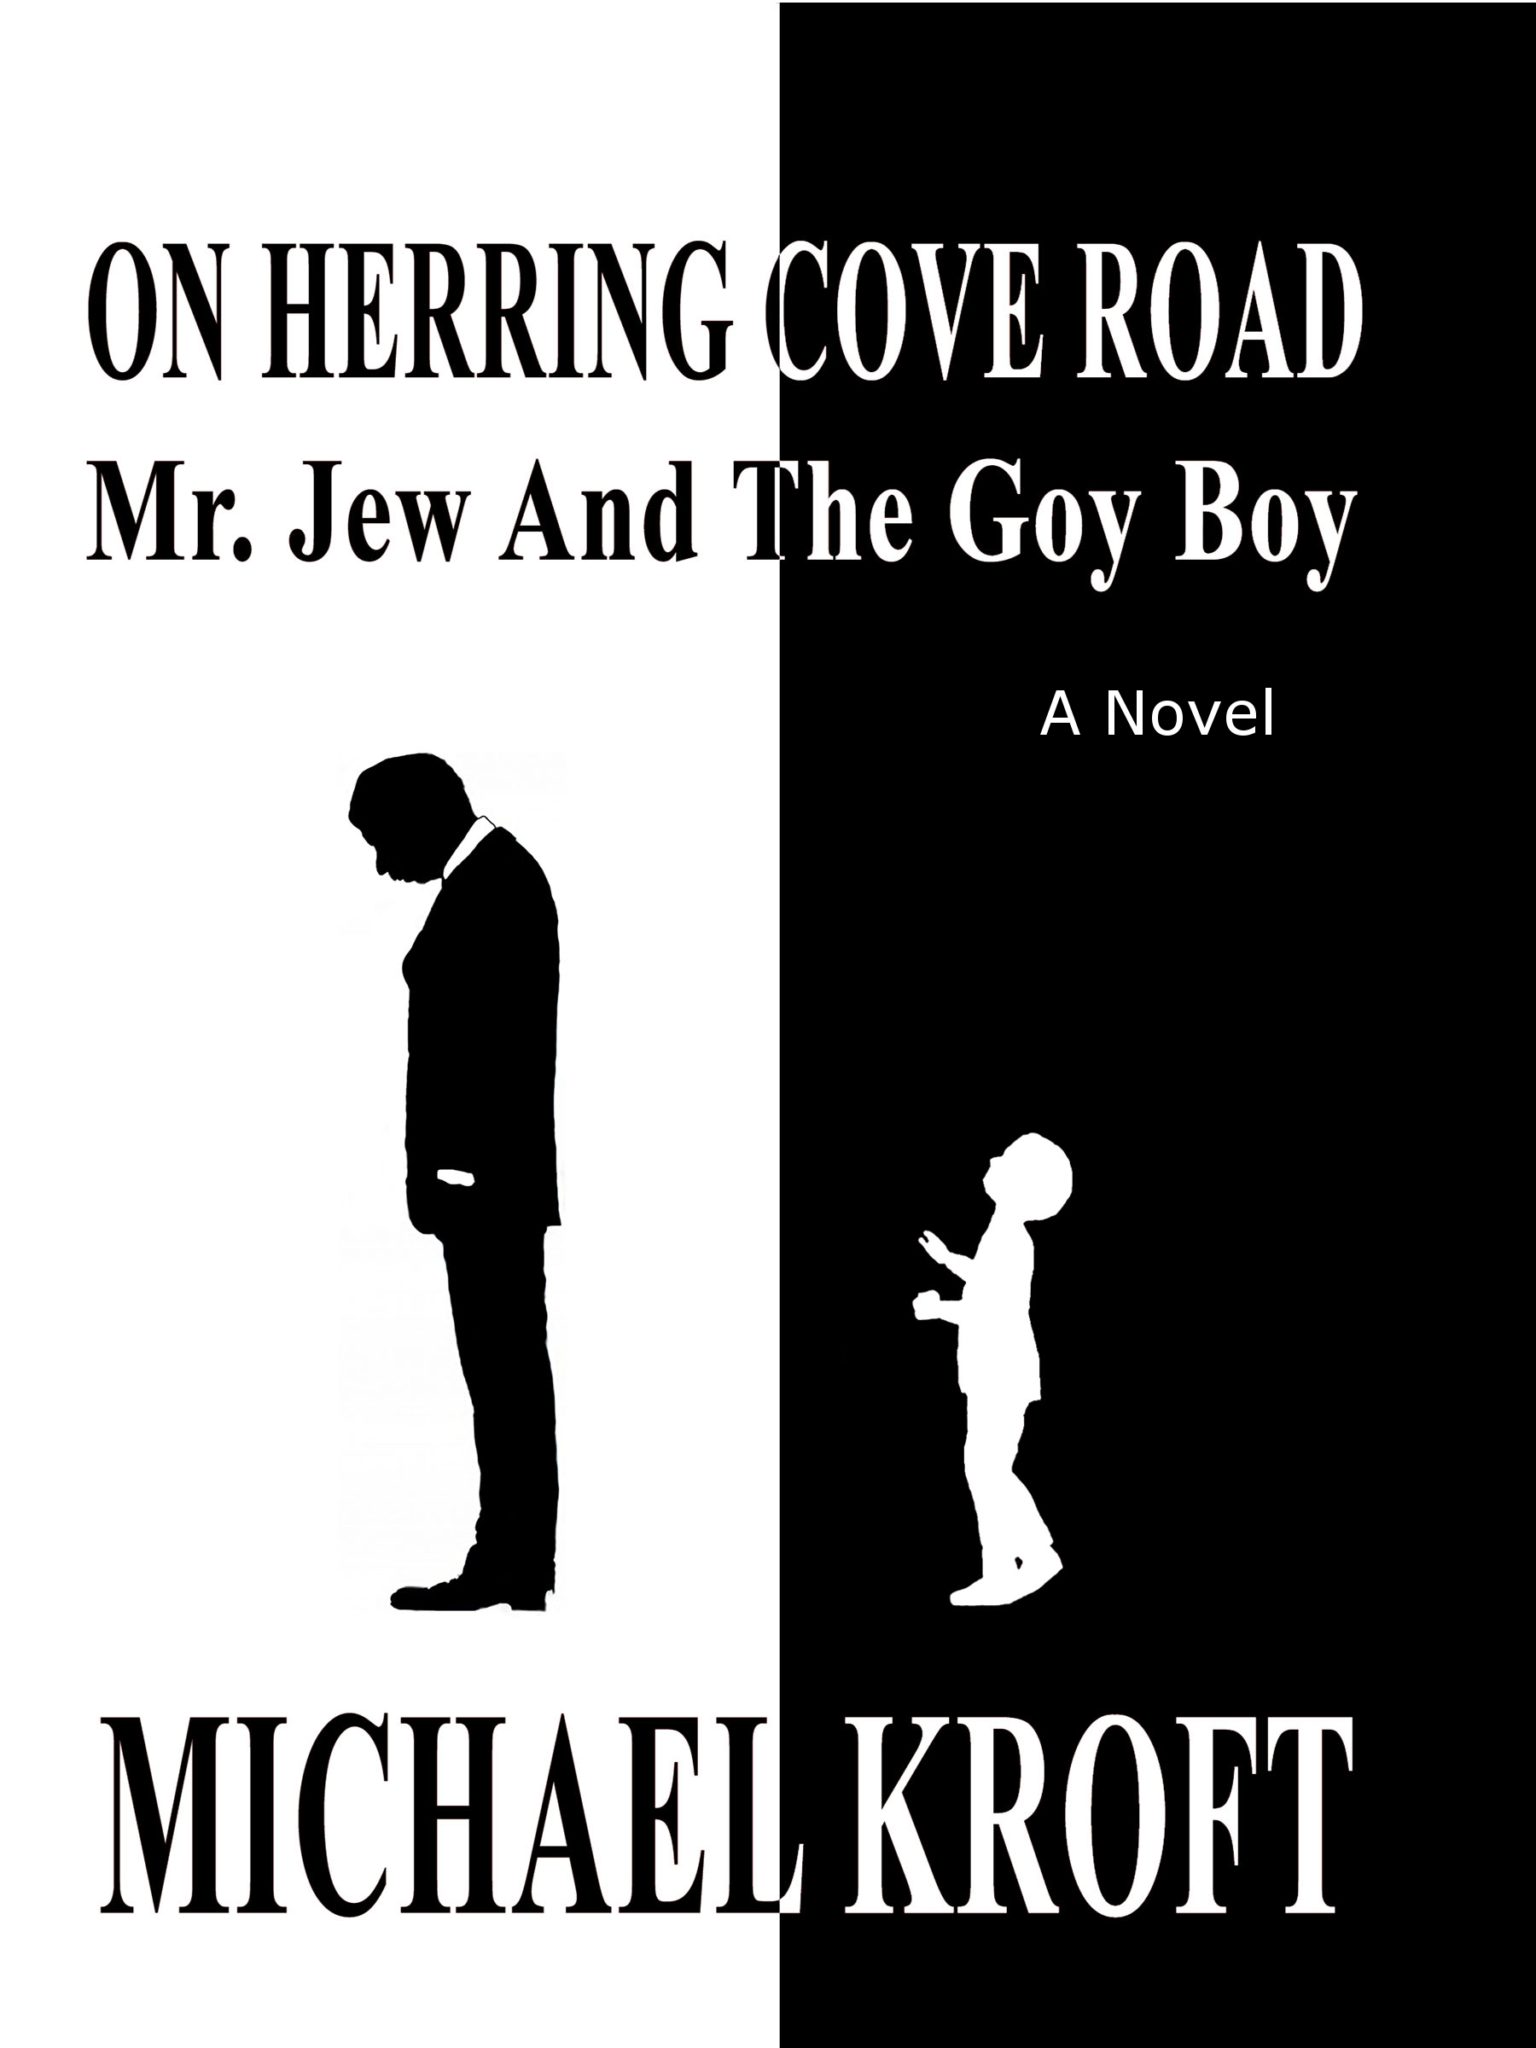 FREE: On Herring Cove Road: Mr. Jew And The Goy Boy by Michael Kroft